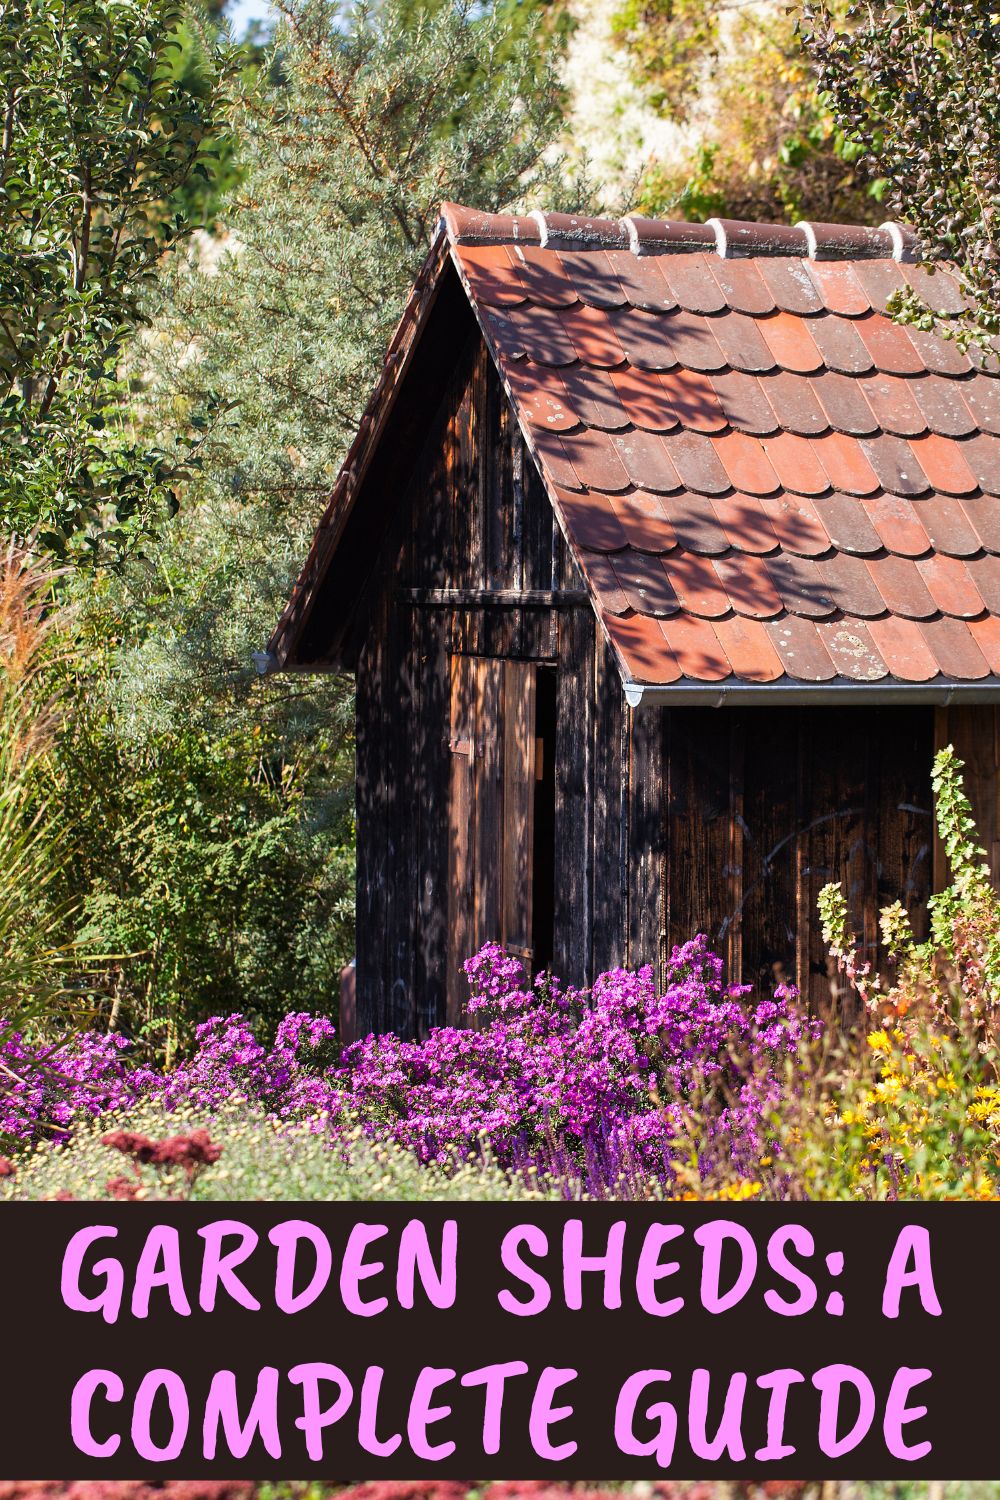 Garden Sheds: A Complete Guide.